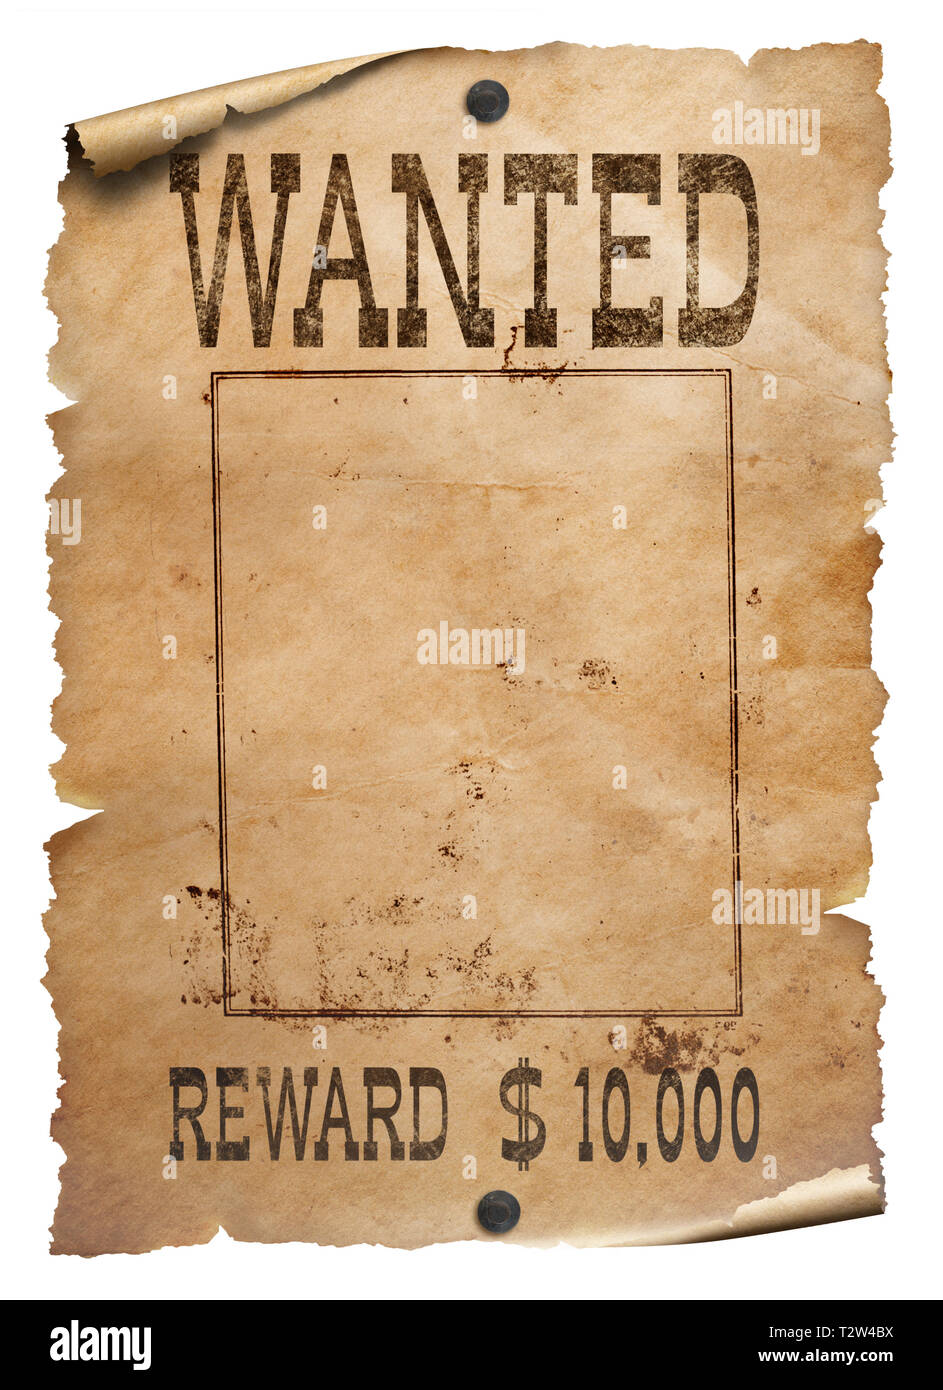 Wanted wild west poster isolated on white background Stock Photo